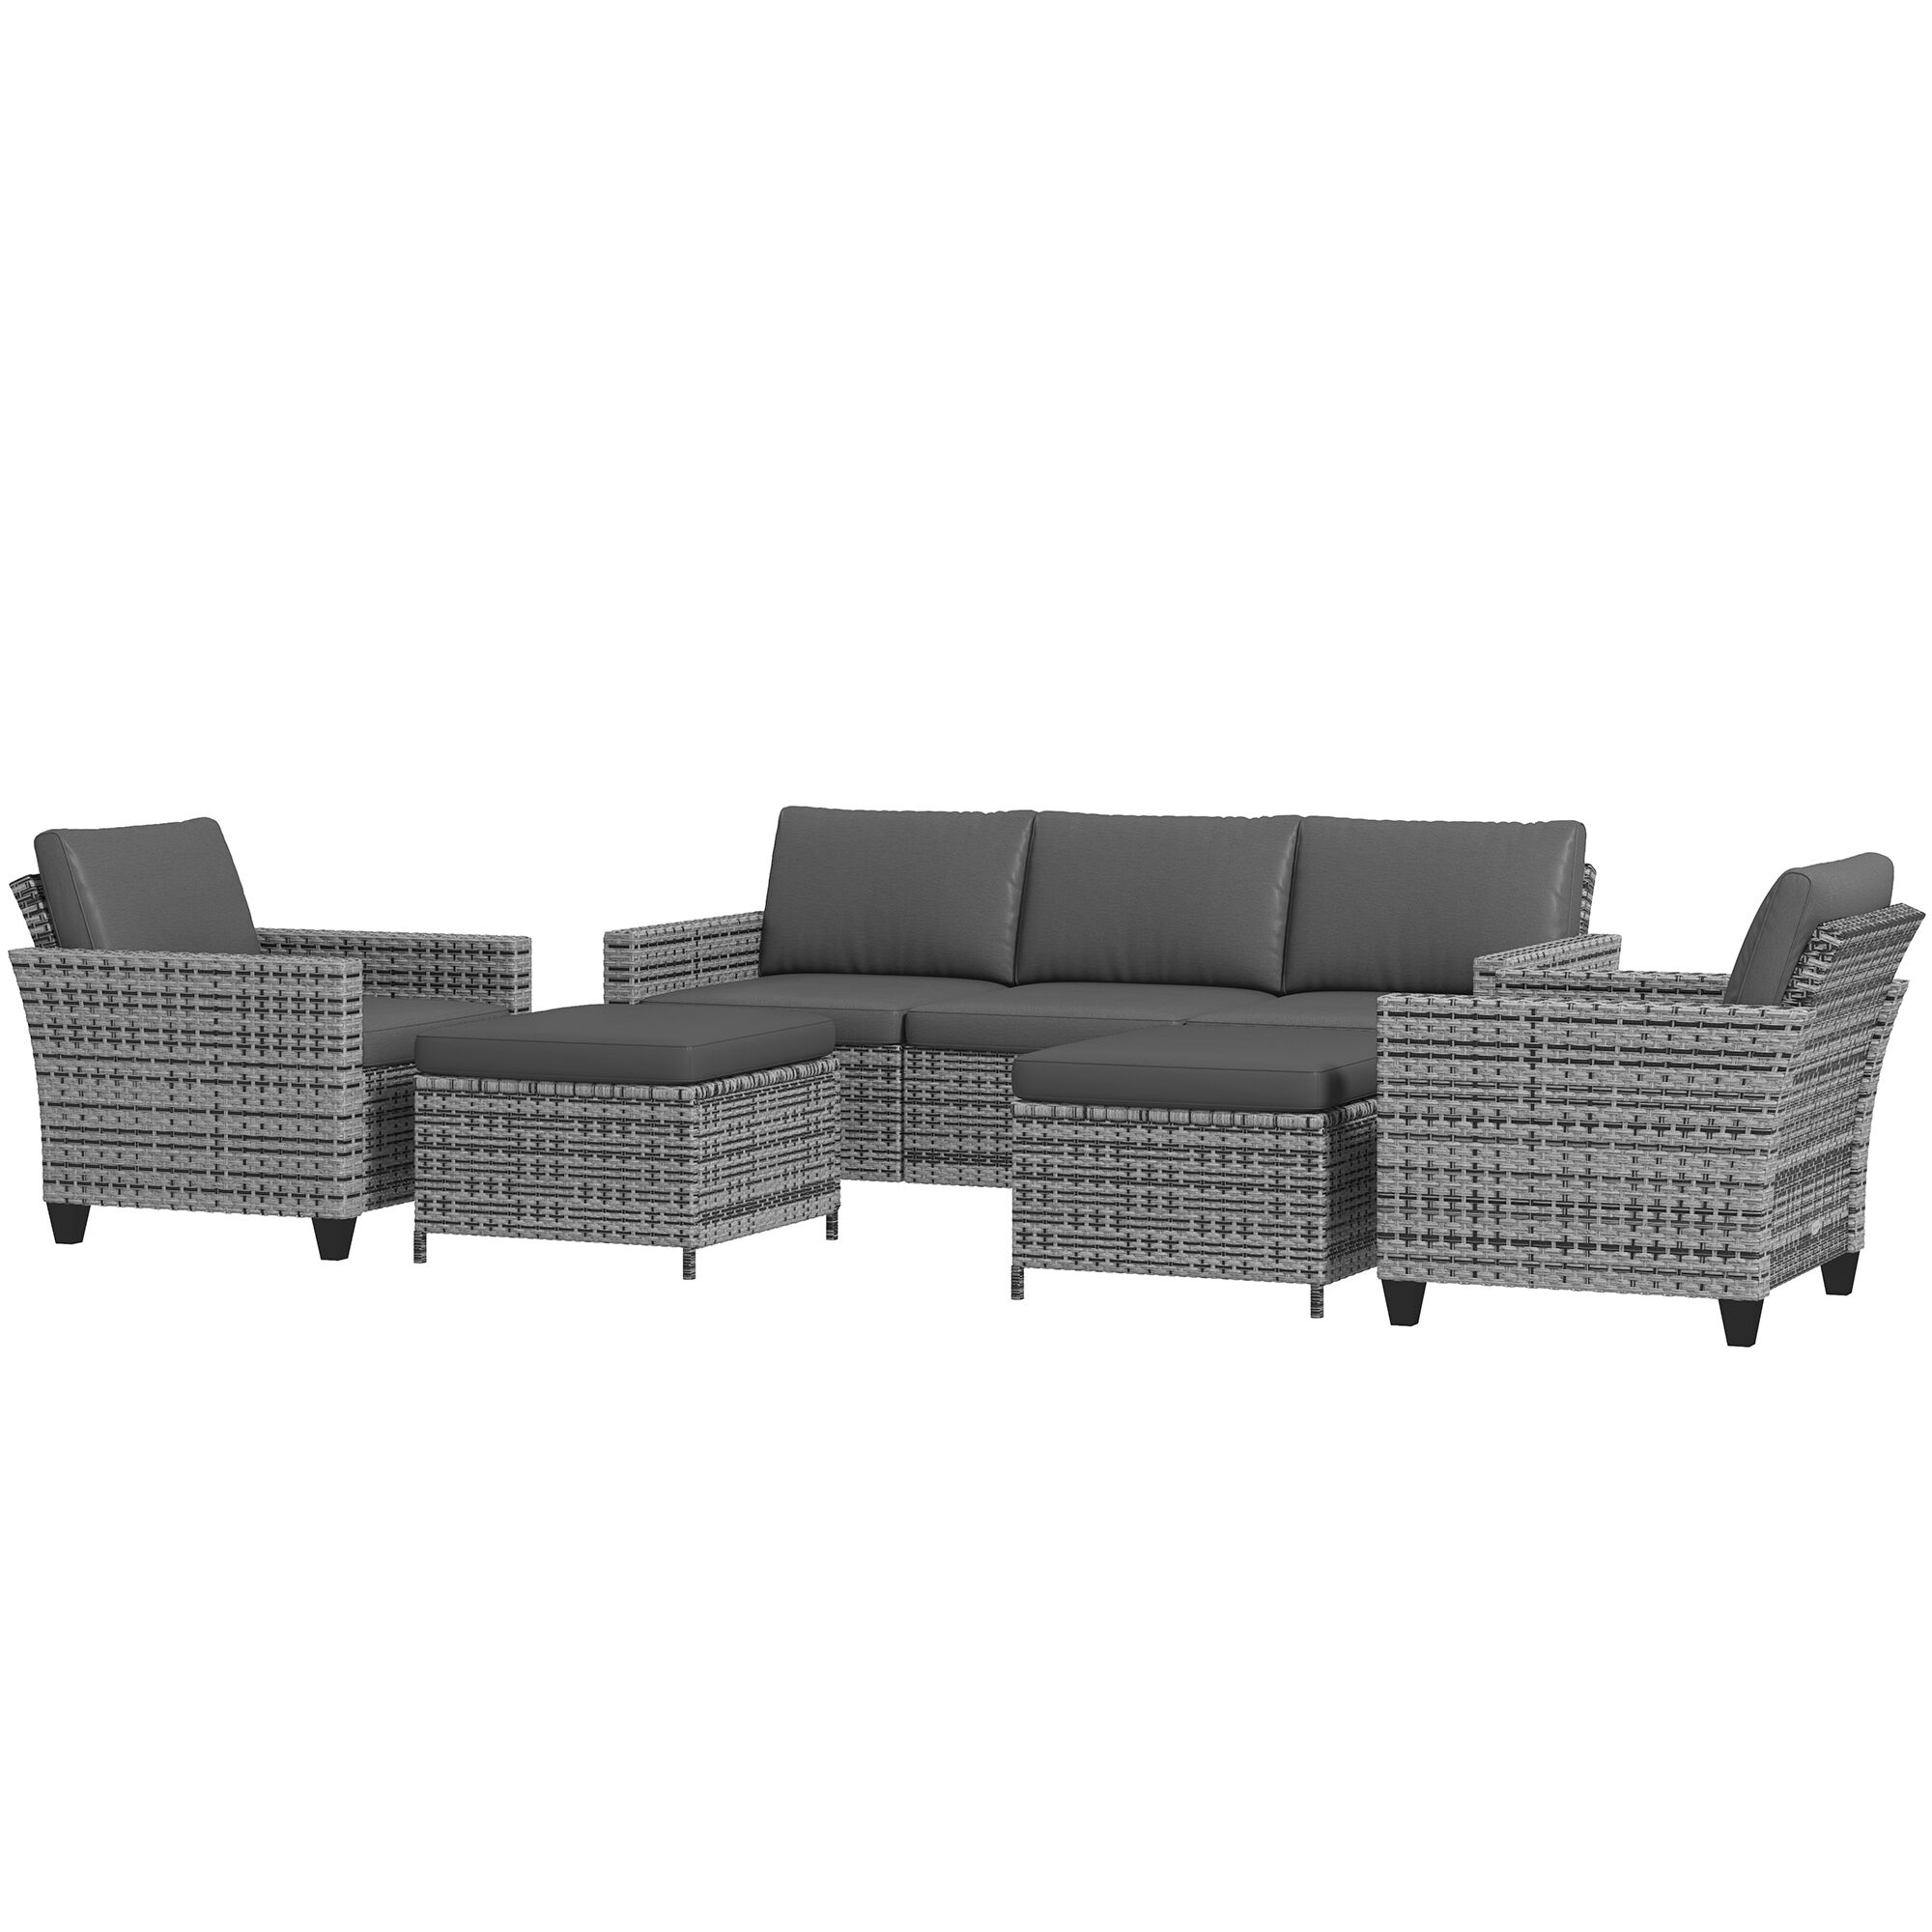 Outsunny 5PC Outdoor Rattan Furniture Set Three-Seater Sofa Armchairs Footstools Cushions Stylish Mixed Gray   Aosom.com